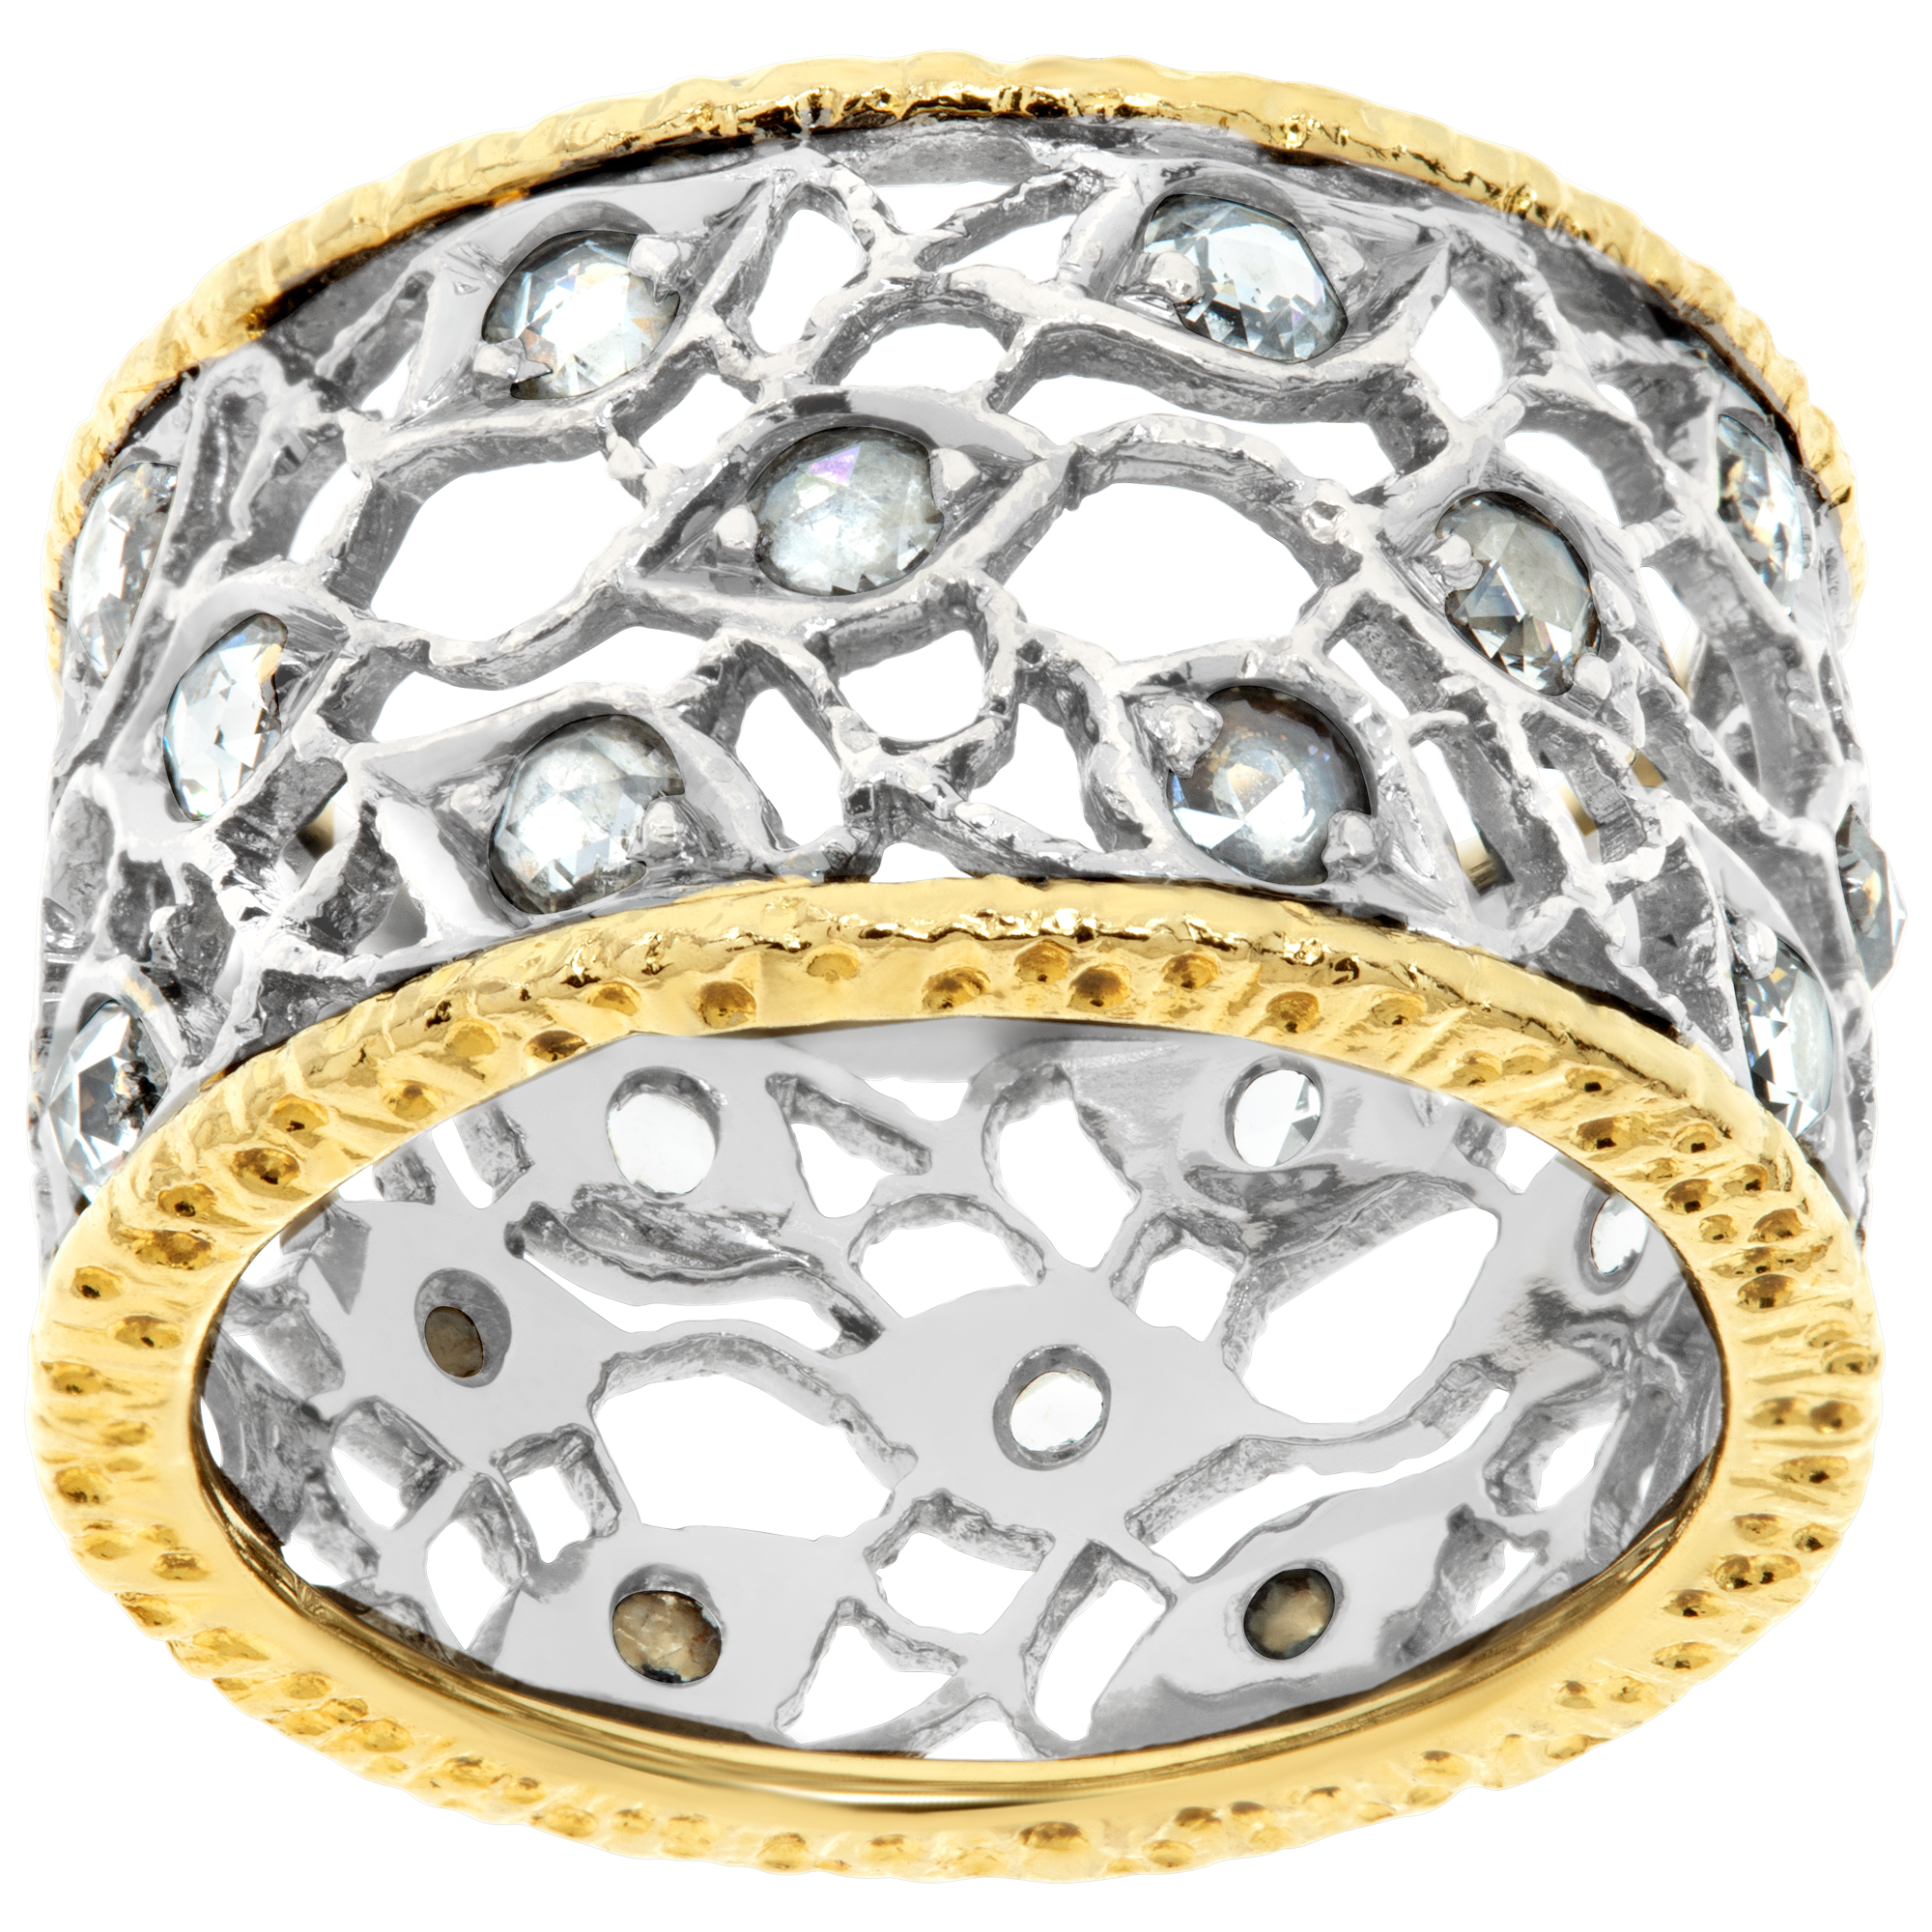 Vintage wide diamond eternity band in 18k white & yellow gold with approximately 1 carat in rose cut diamonds